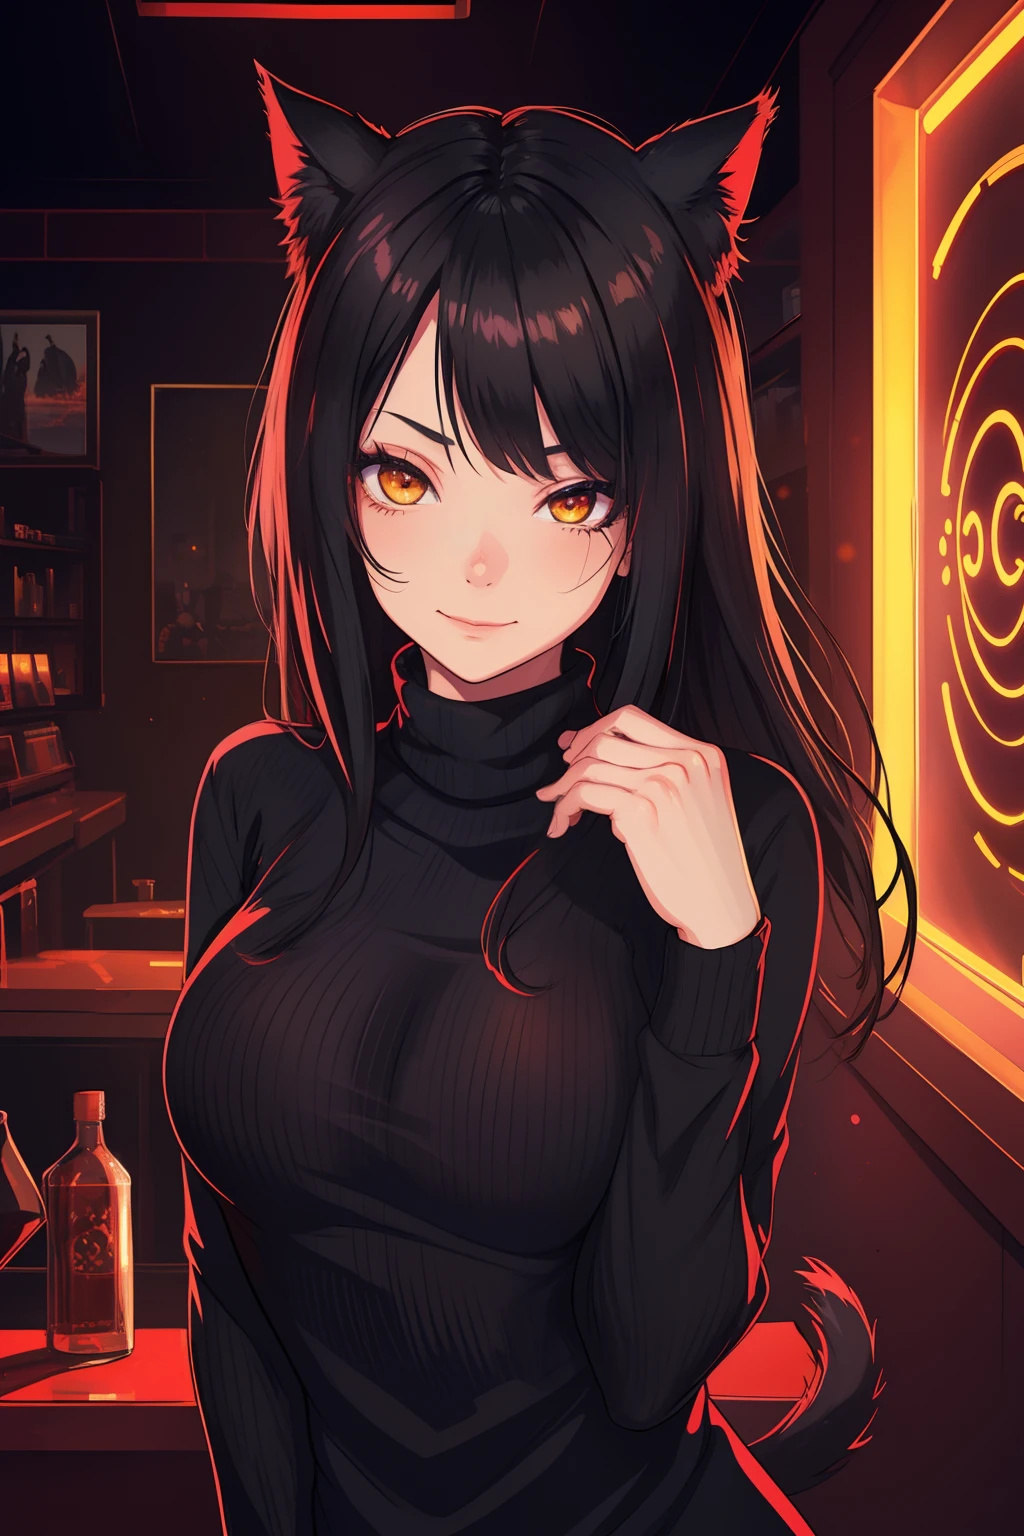 portrait, (NSFW, slim body, 1 girl), (best quality, 4k, 8k, high-res, ultra-detailed, anime style, pastel, warm), catgirl, black hair, yellow glowing eyes, looking at viewer, smug, slightly smiling, goth makeup, aesthetic, red room aesthetic, red lightning, red interior, red light, dark red lights, black turtleneck sweater, closeup